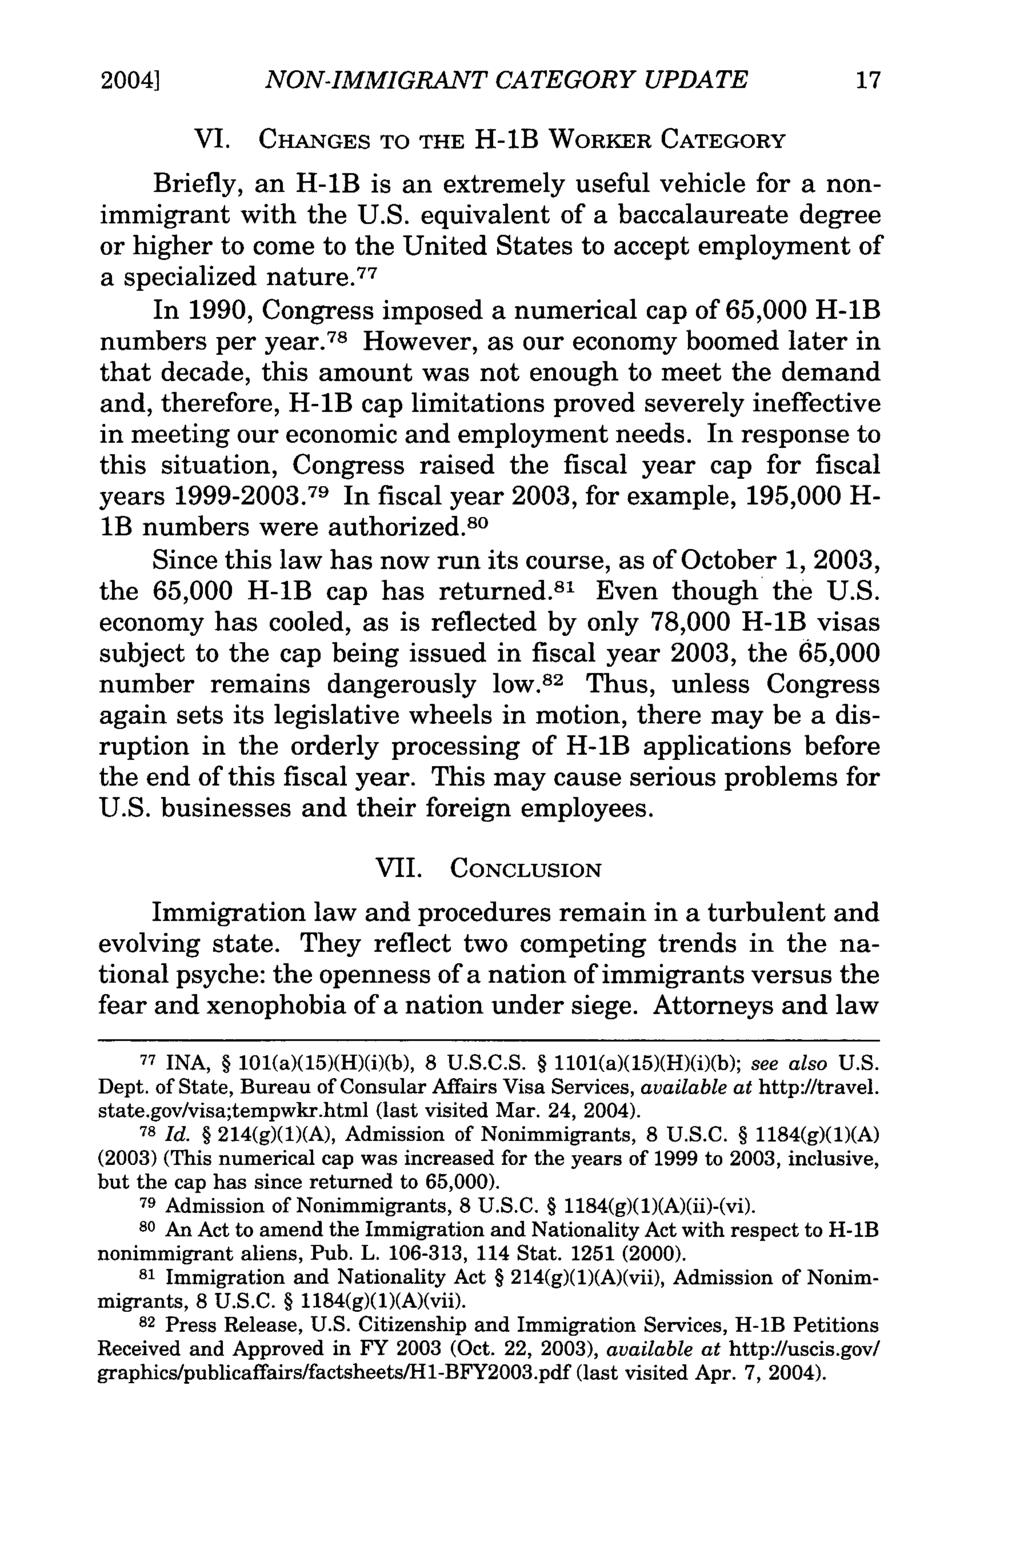 20041 NON-IMMIGRANT CATEGORY UPDATE VI. CHANGES TO THE H-1B WORKER CATEGORY Briefly, an H-1B is an extremely useful vehicle for a nonimmigrant with the U.S. equivalent of a baccalaureate degree or higher to come to the United States to accept employment of a specialized nature.